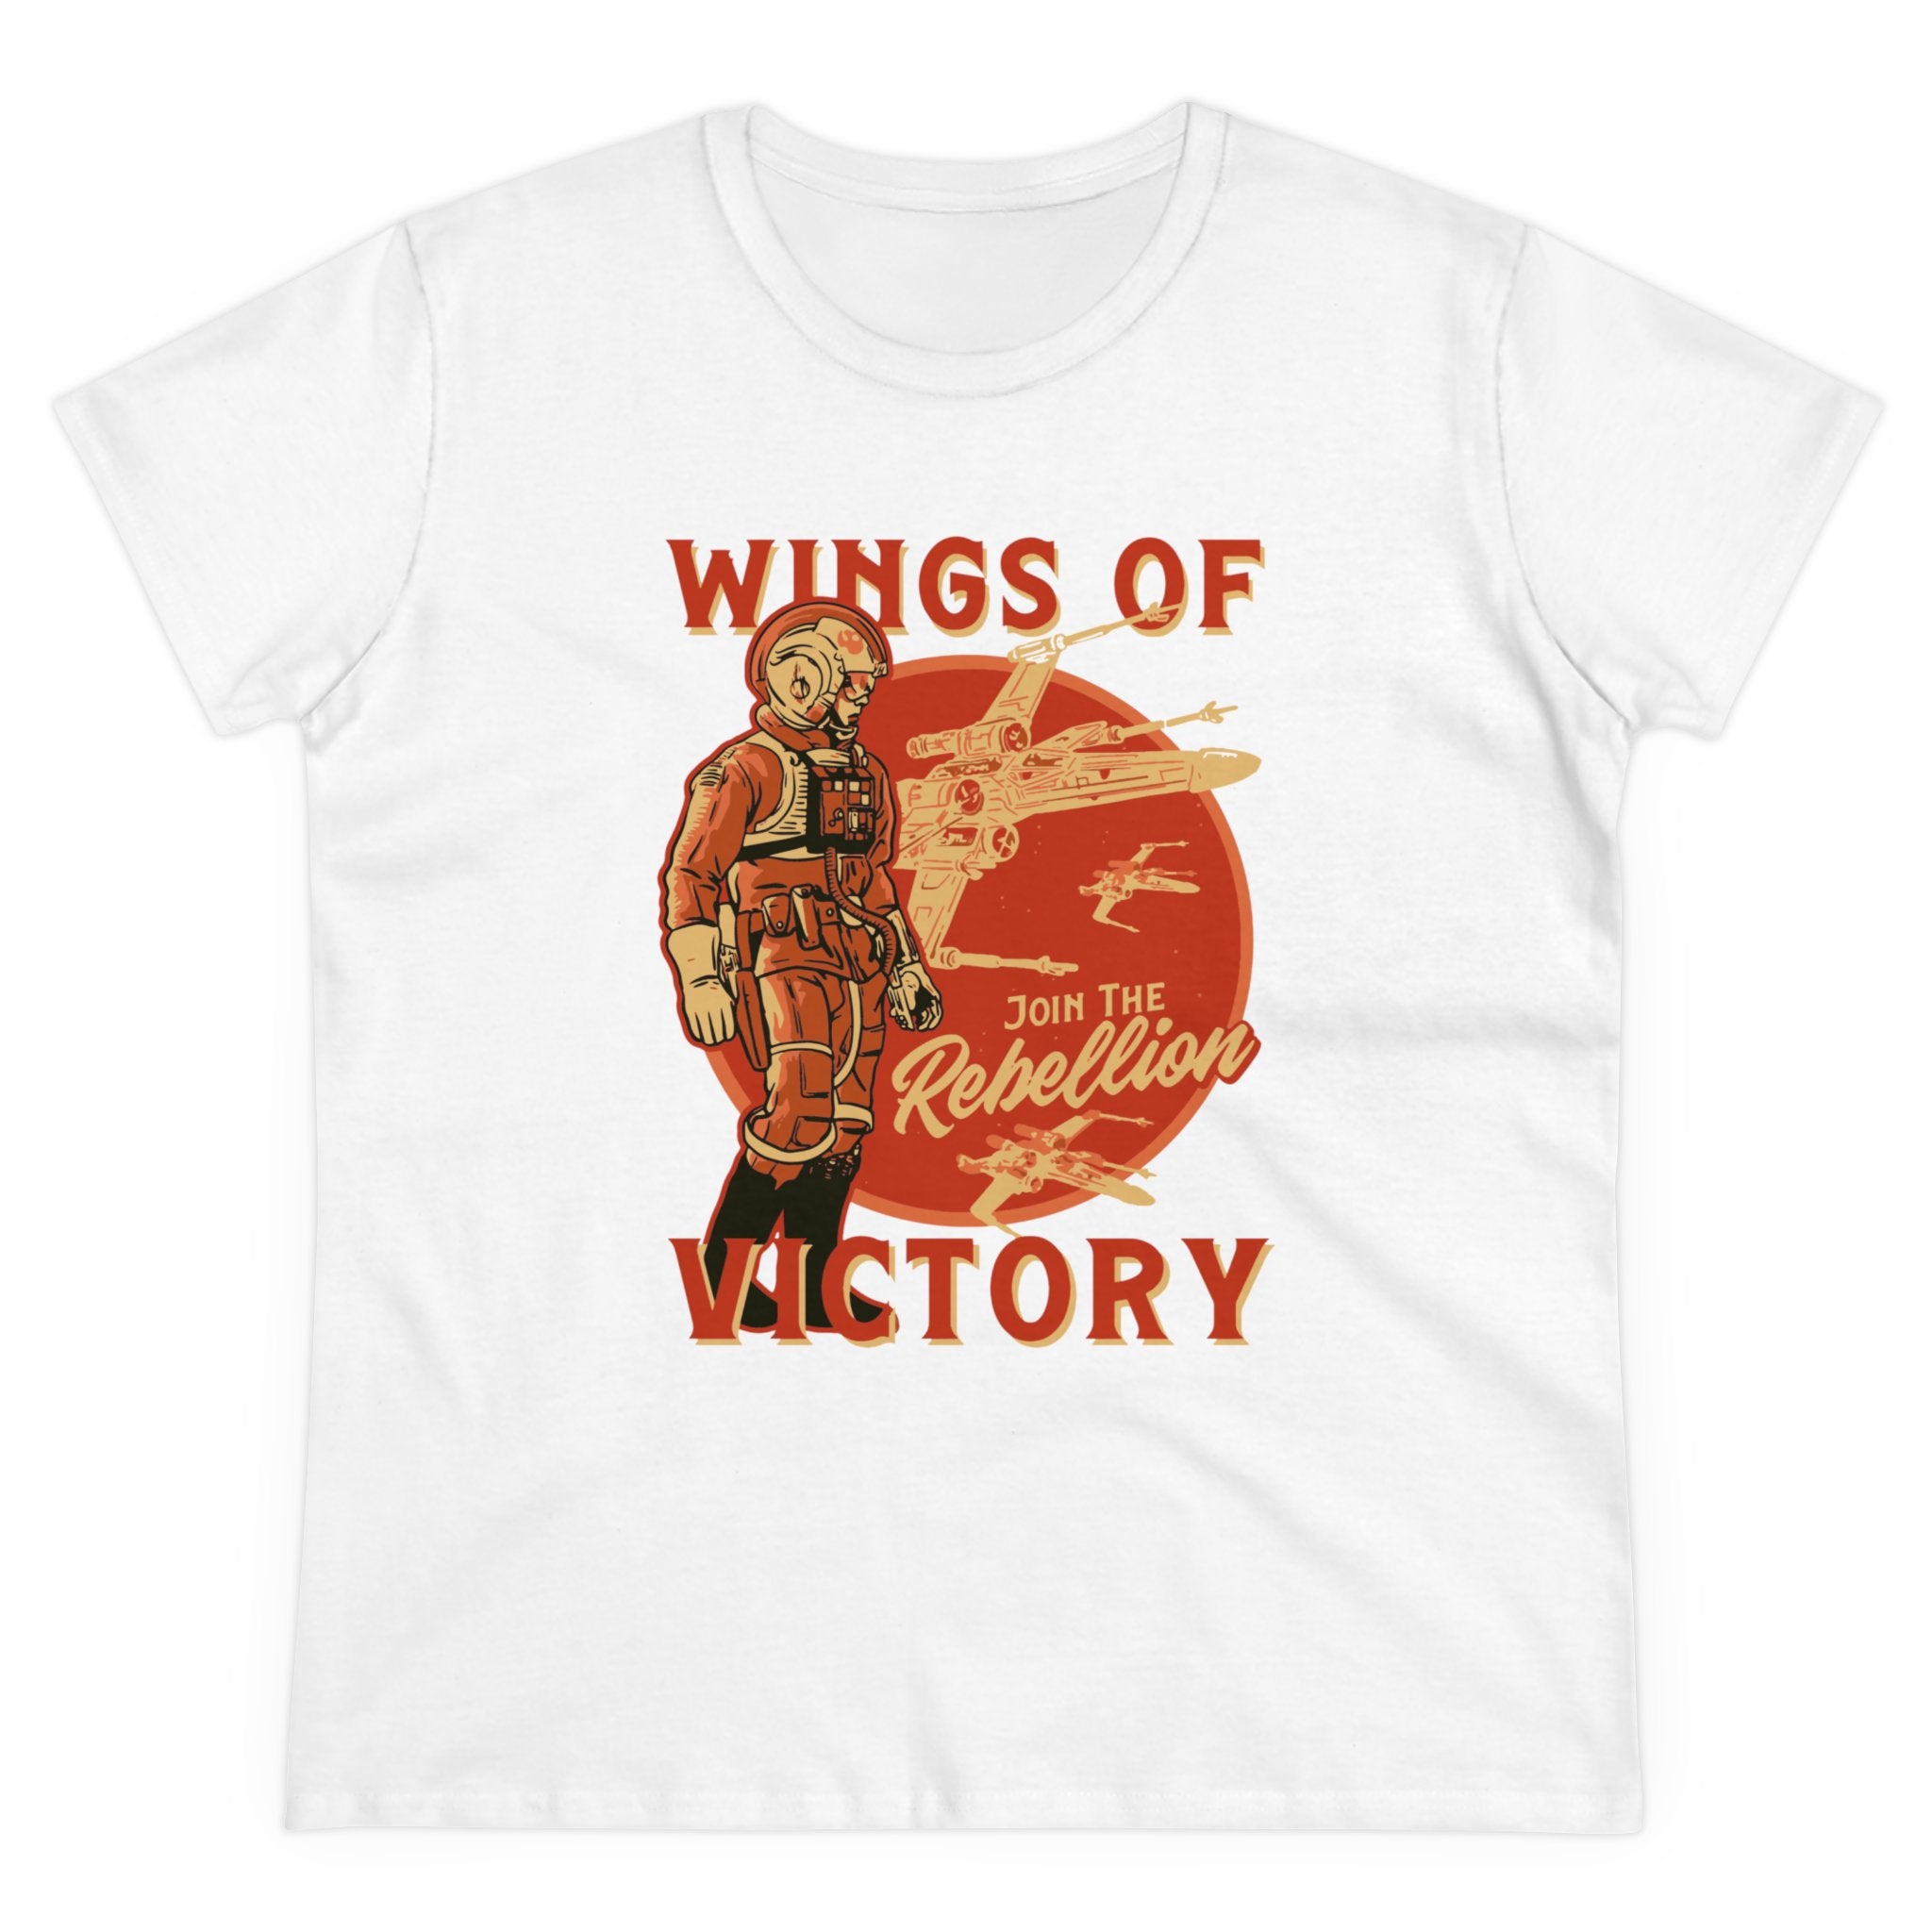 Wings of Victory - Women's Tee featuring a vintage-style illustration of a pilot and spacecraft, adorned with the text "Wings of Victory - Join the Rebellion" in bold red and orange letters.